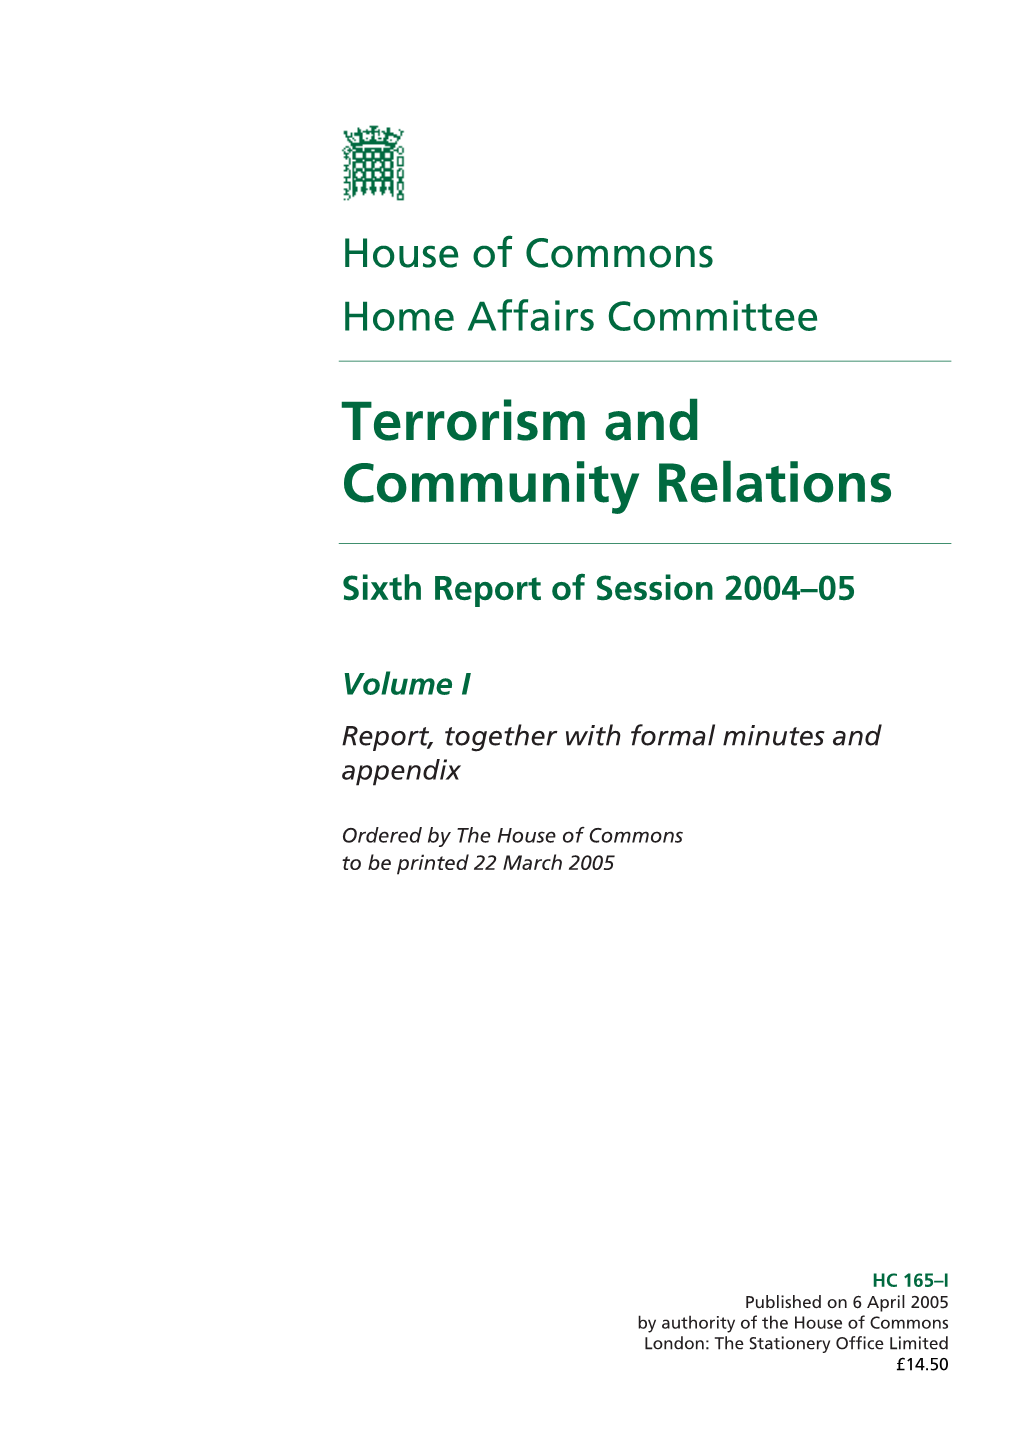 Terrorism and Community Relations